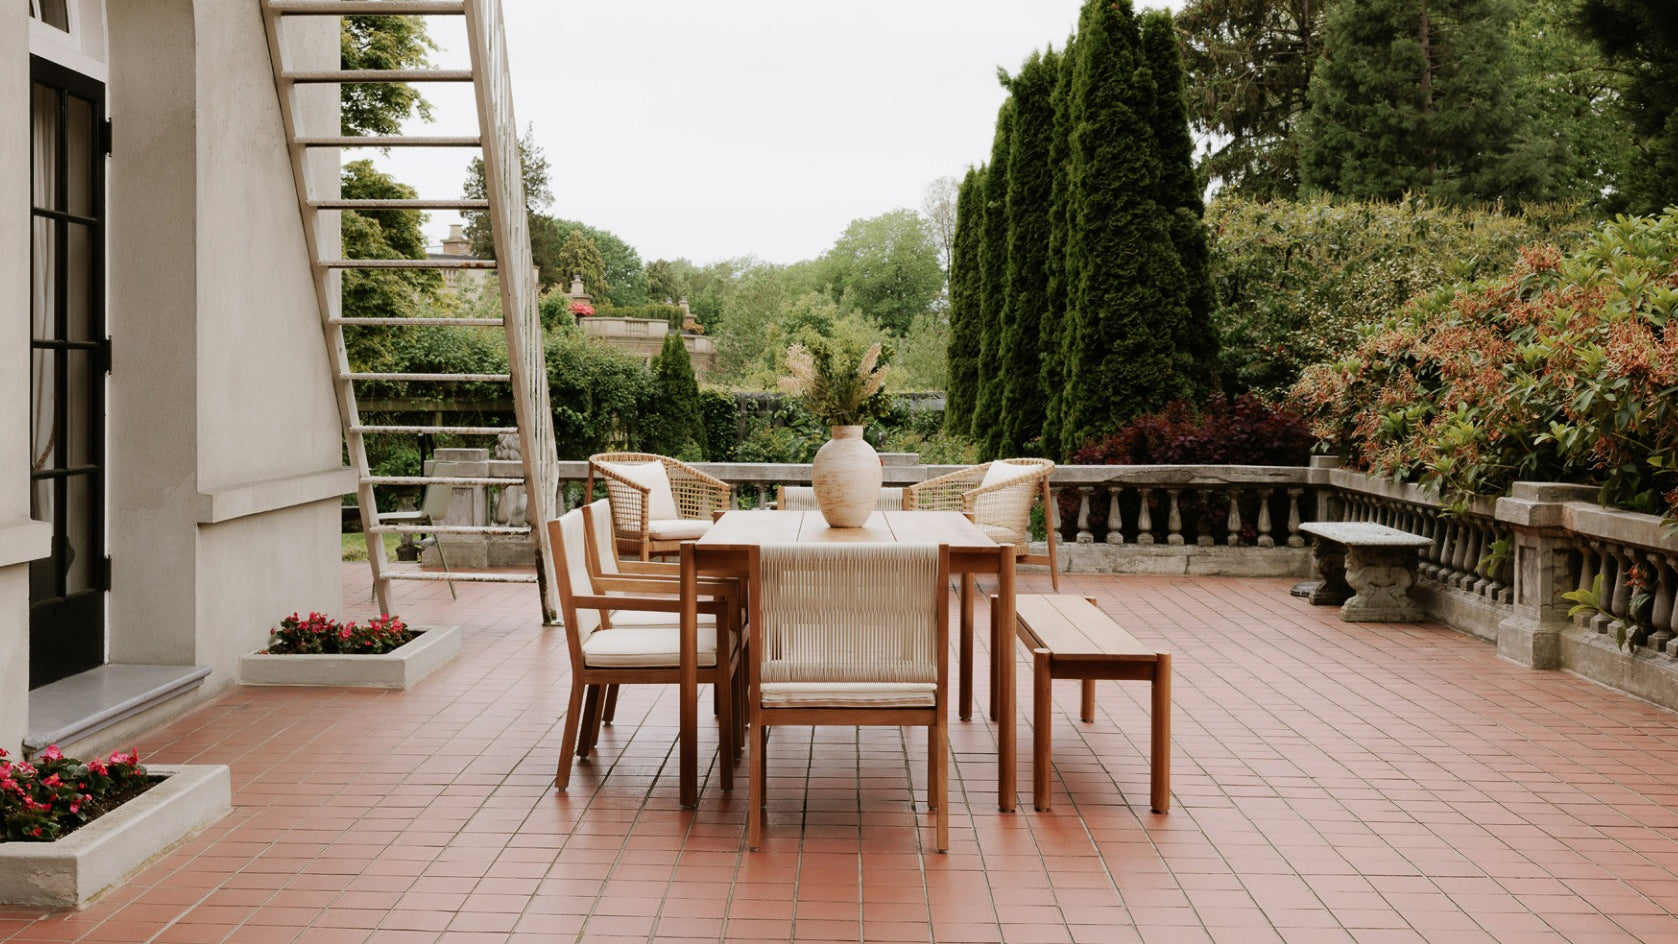 Ready for Spring: Freshen Up Your Patio